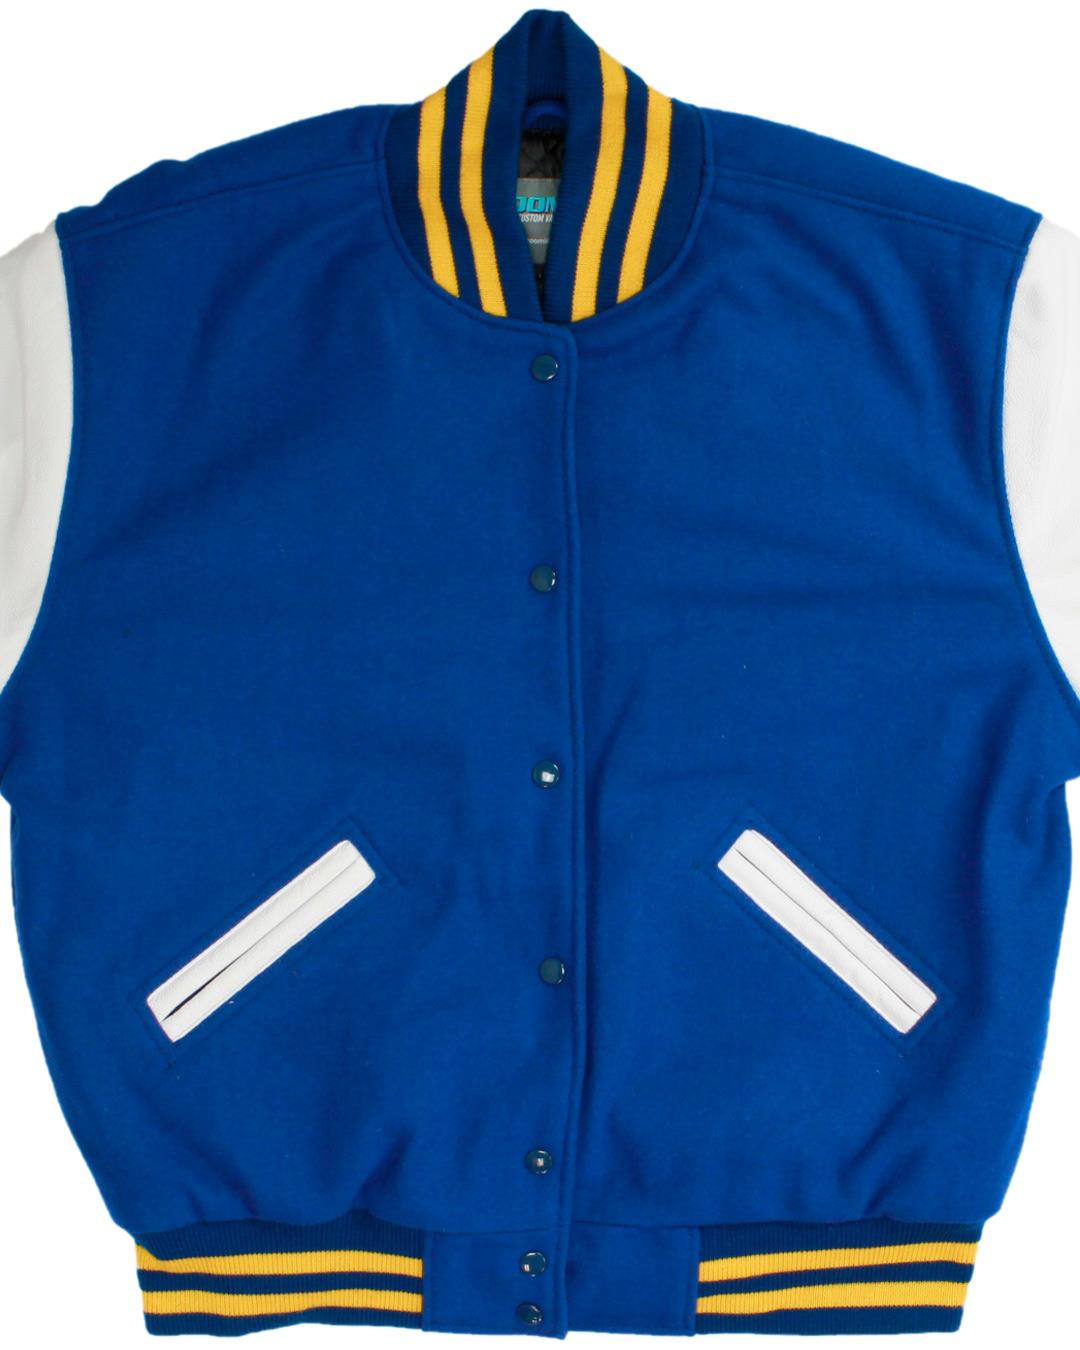 Stanfield High School Letter Jacket, Stanfield, OR - Front